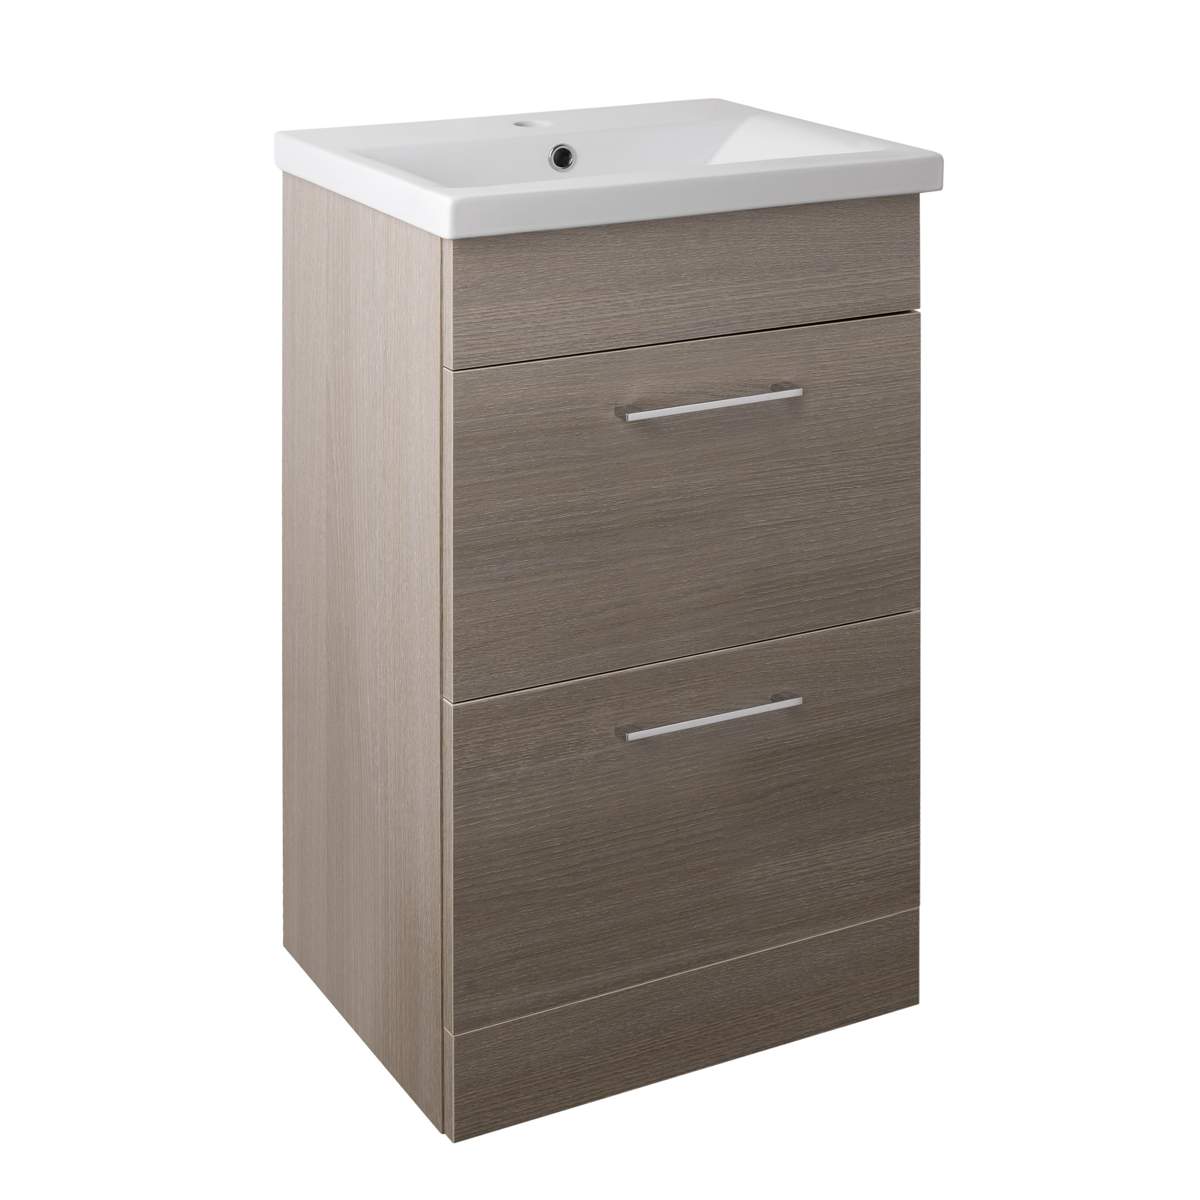 JTP Pace Units 500mm Floor Standing Unit with Drawers and Basin in Grey (PFS501GR + P500BS)